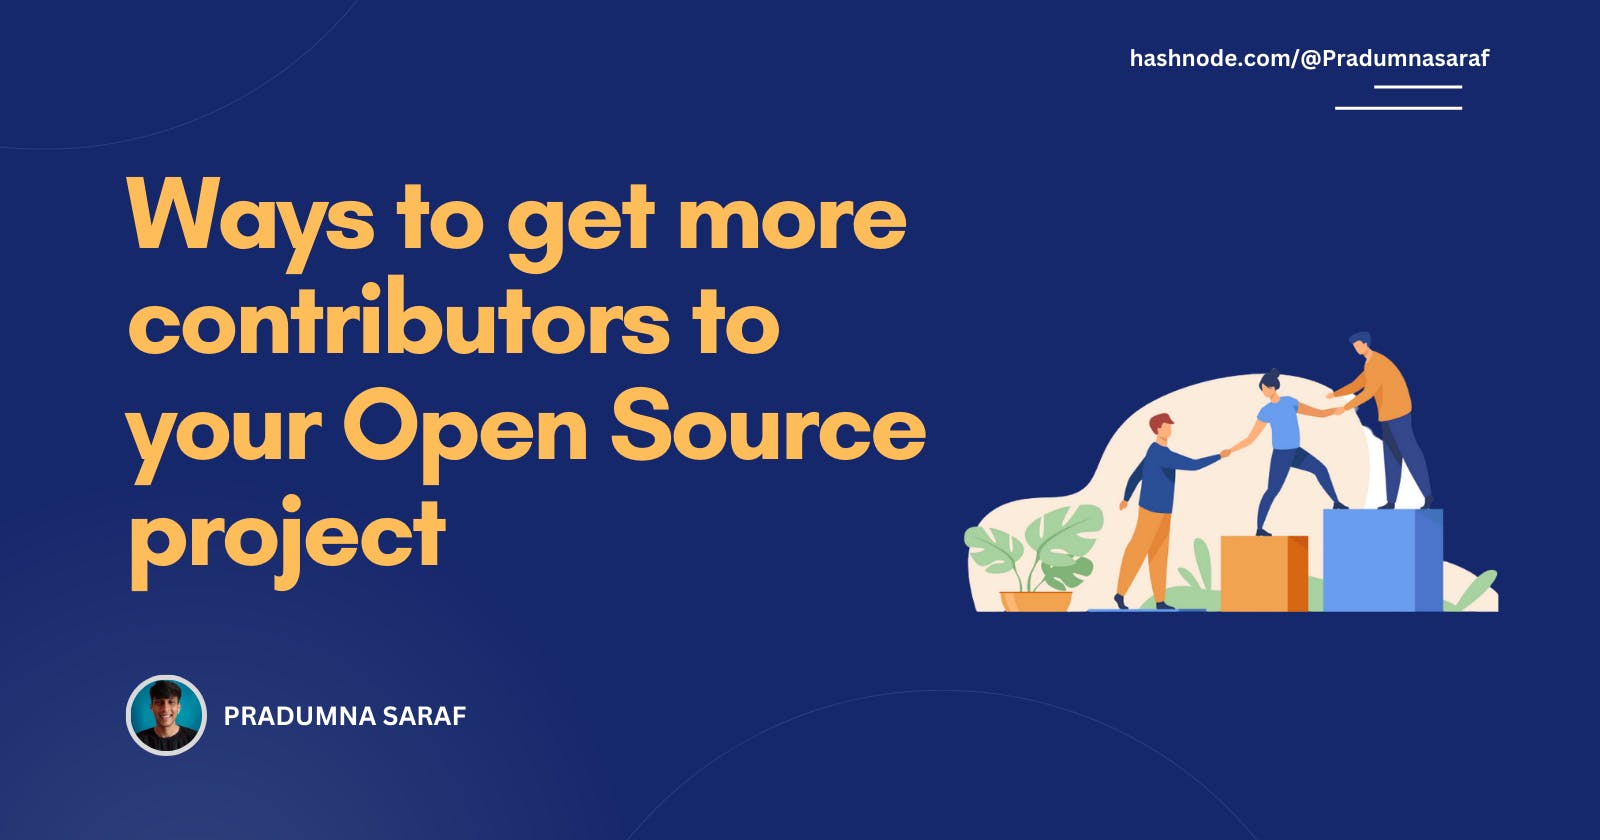 Ways to get more contributors to your Open Source project